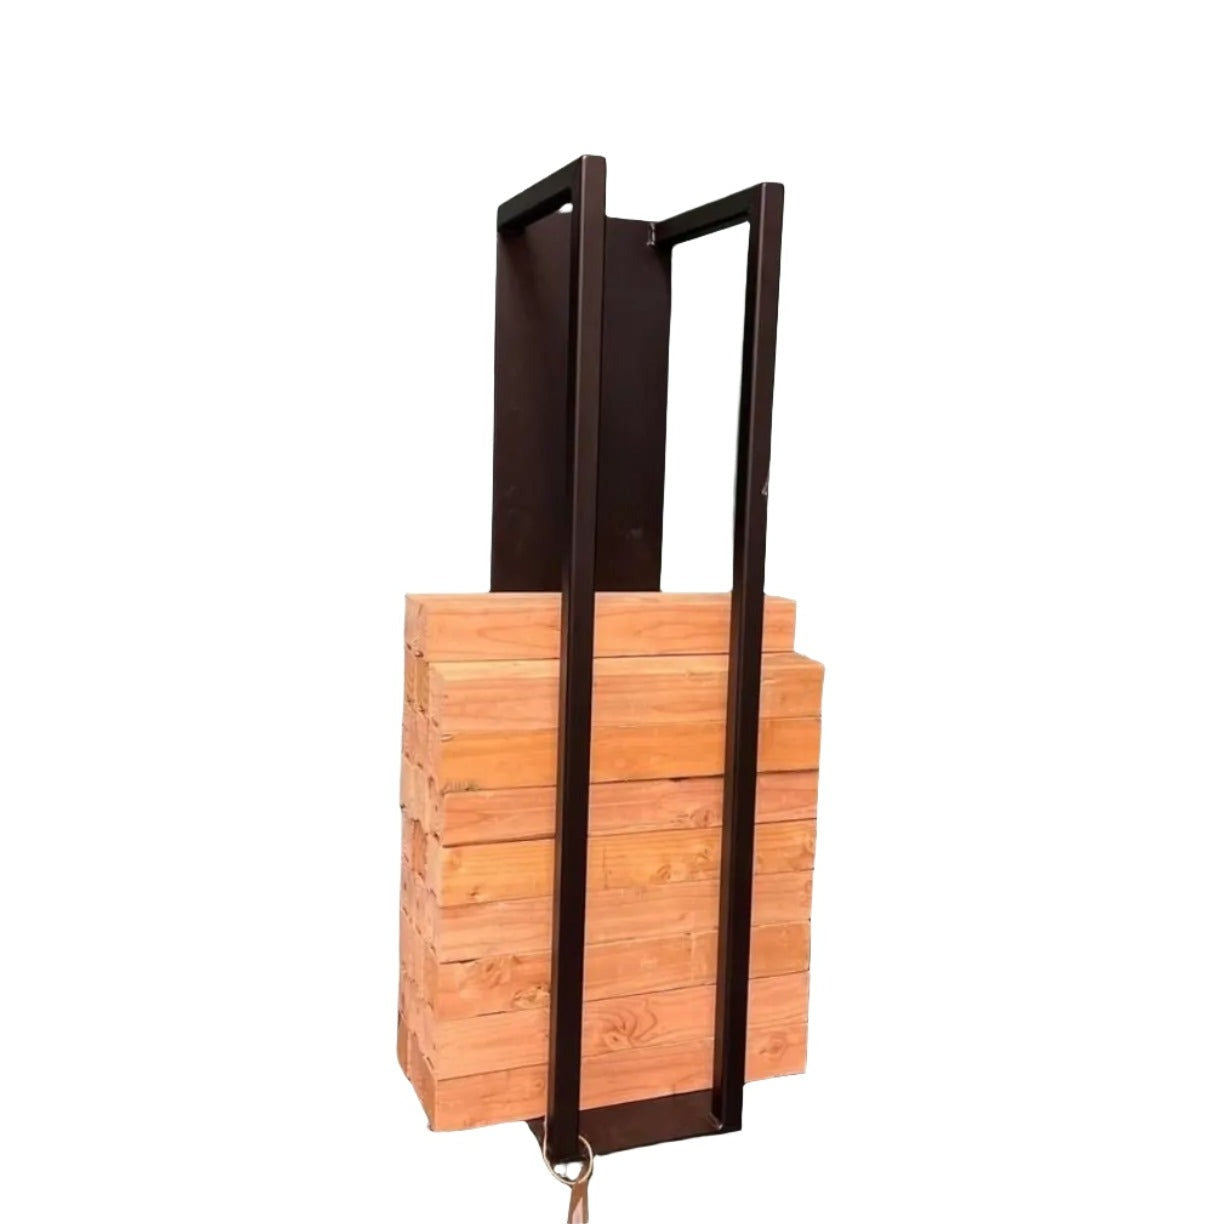 The Toby Firewood Holder  36” Wall Mount Length Finish Copper Powder Coat | Industrial Farm Co